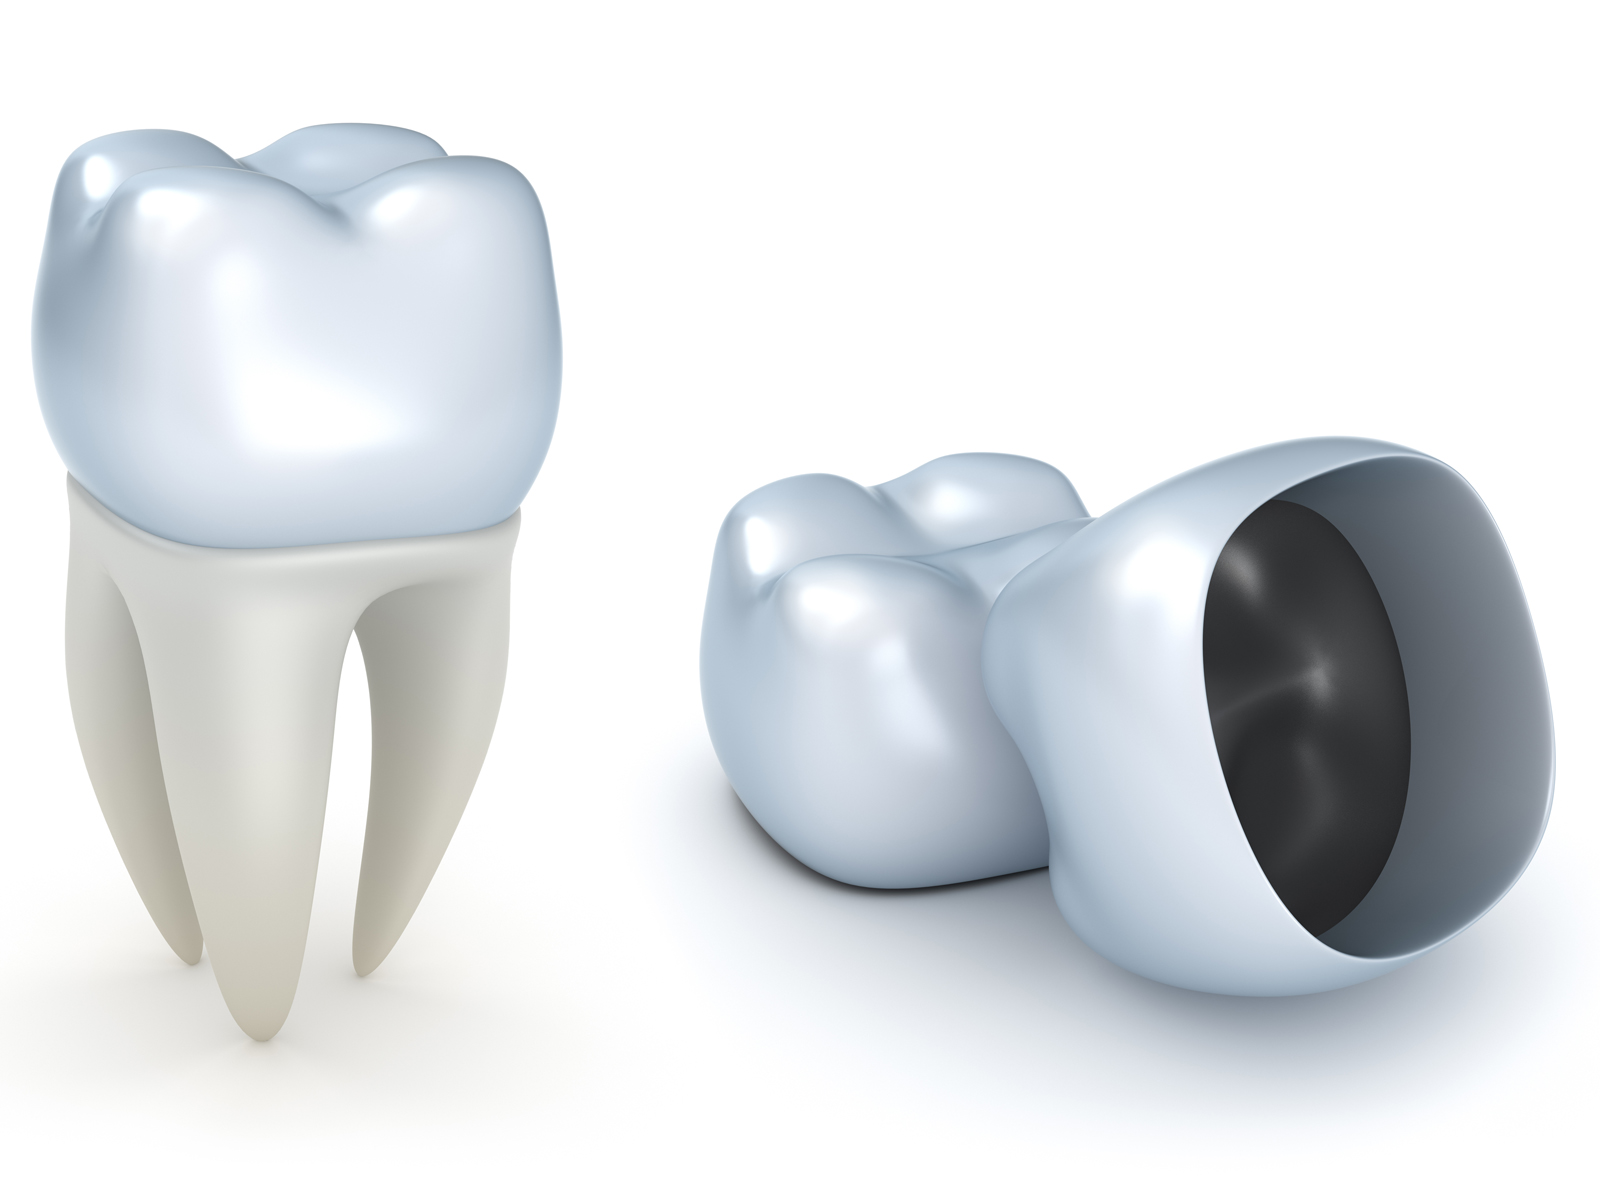 Who is a good candidate for dental crowns?